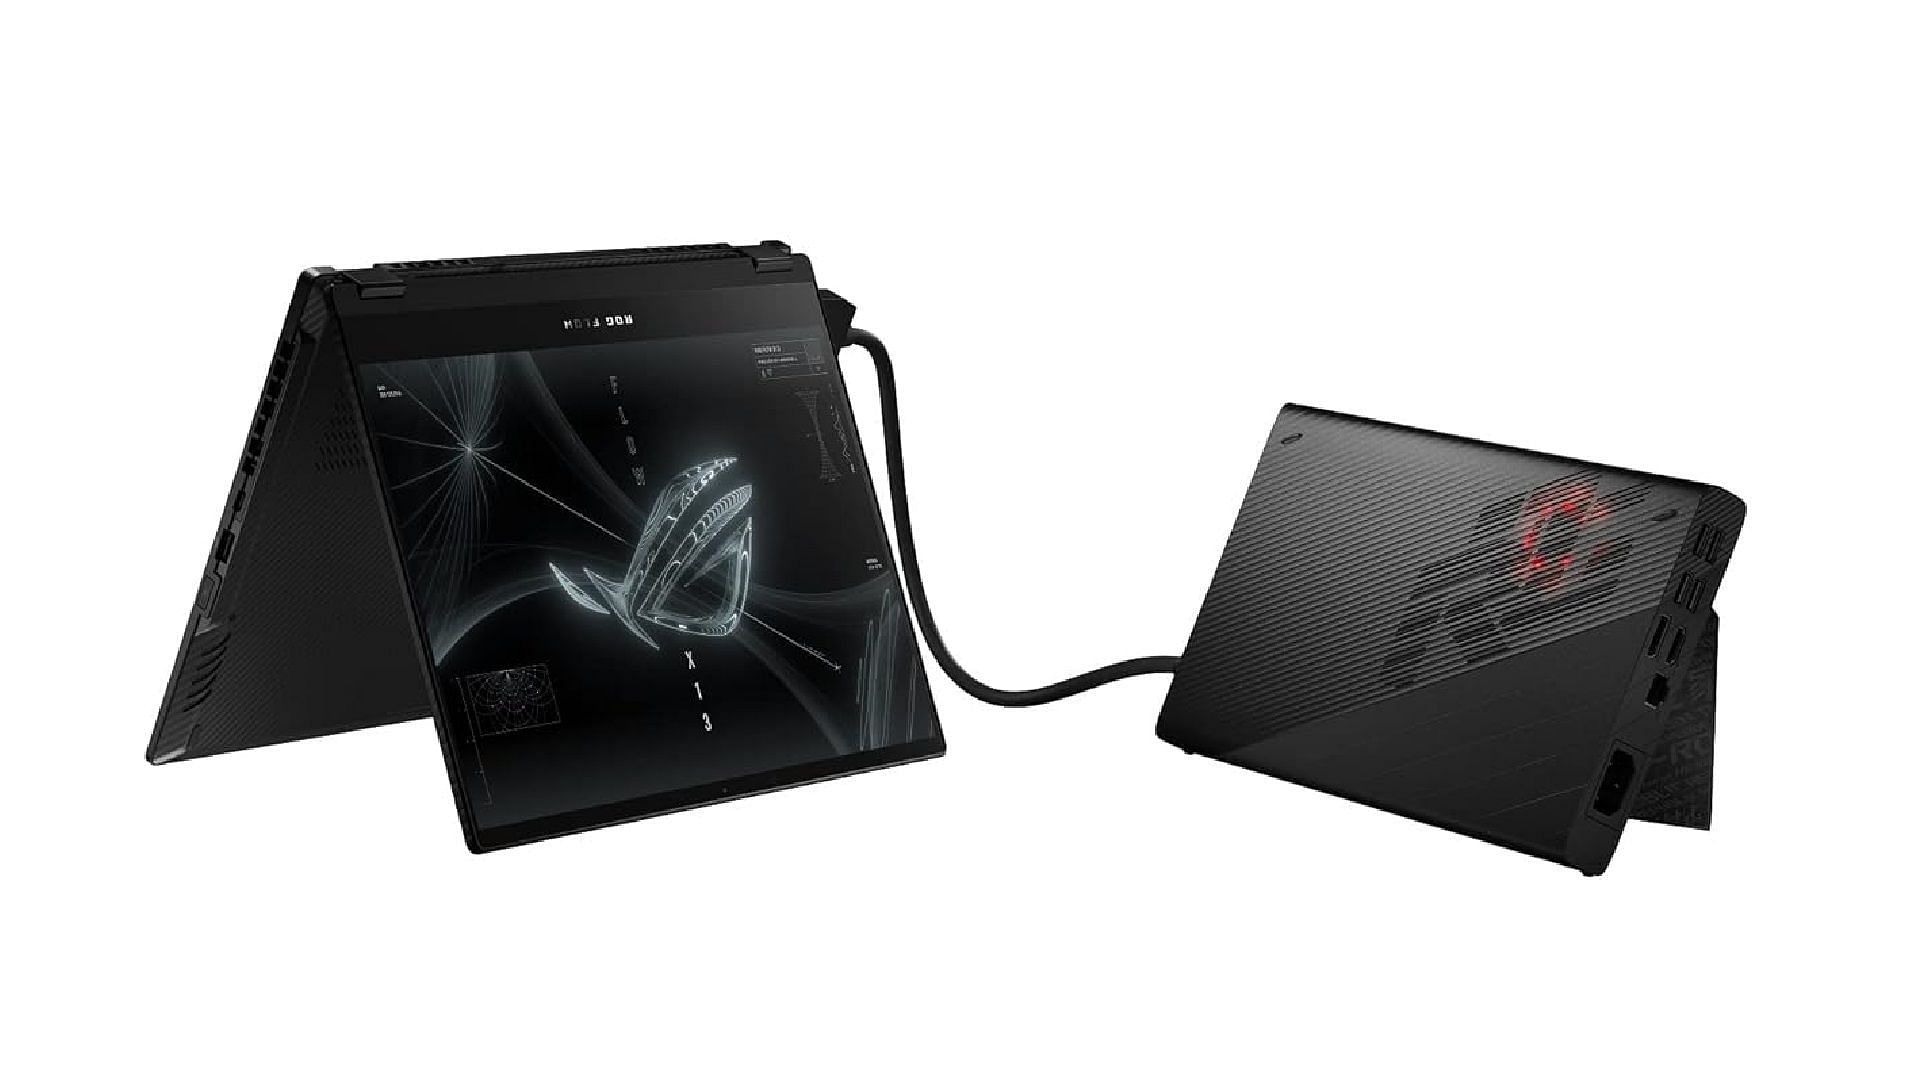 ASUS ROG Flow X13 with XG Mobile (Image via ASUS)